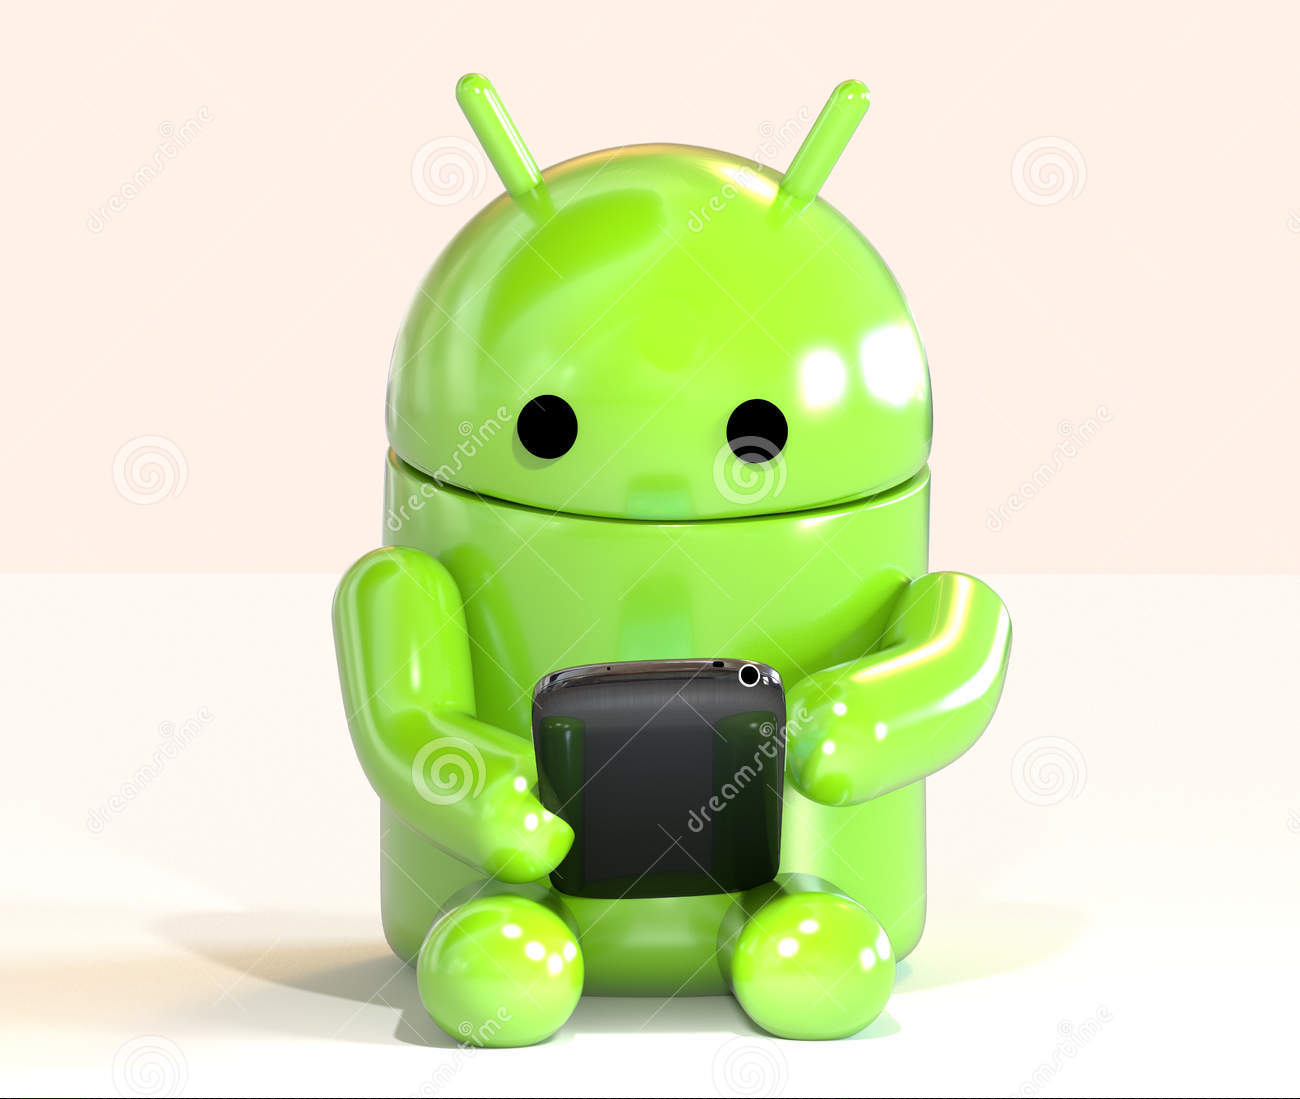 lloyd-android-os-logo-using-smartphone-white-background-green-robot-system-48433280.png